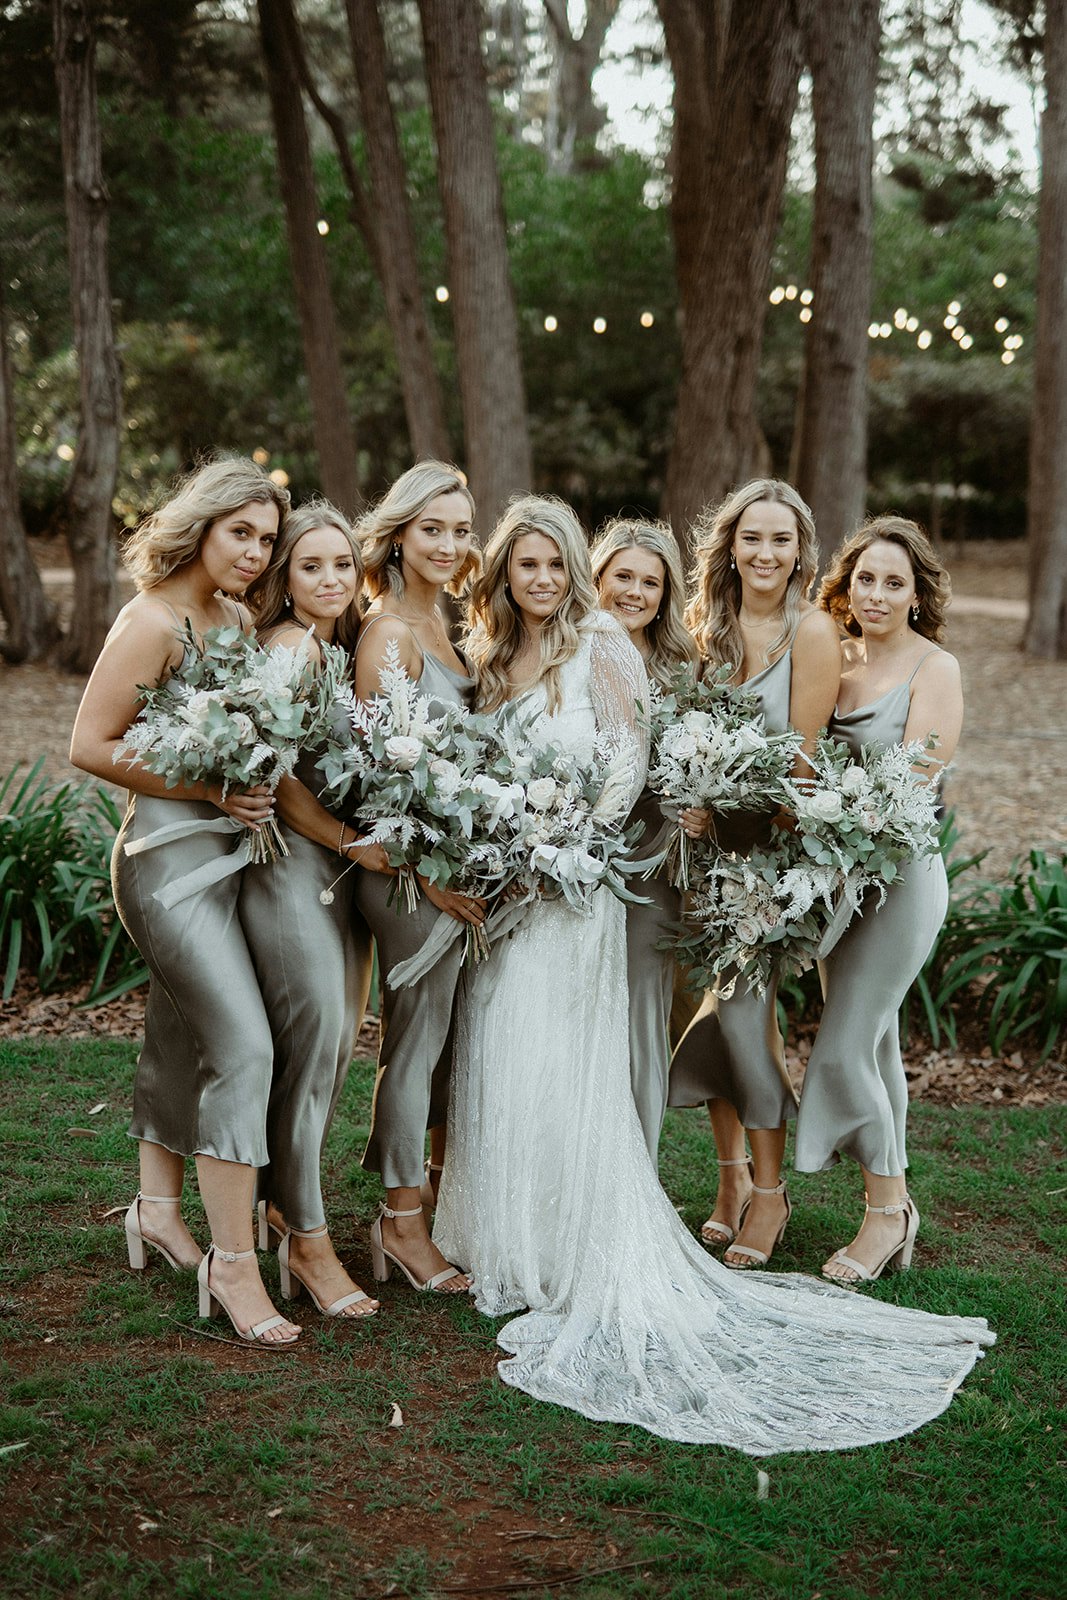 Bride and bridesmaids holding flowers